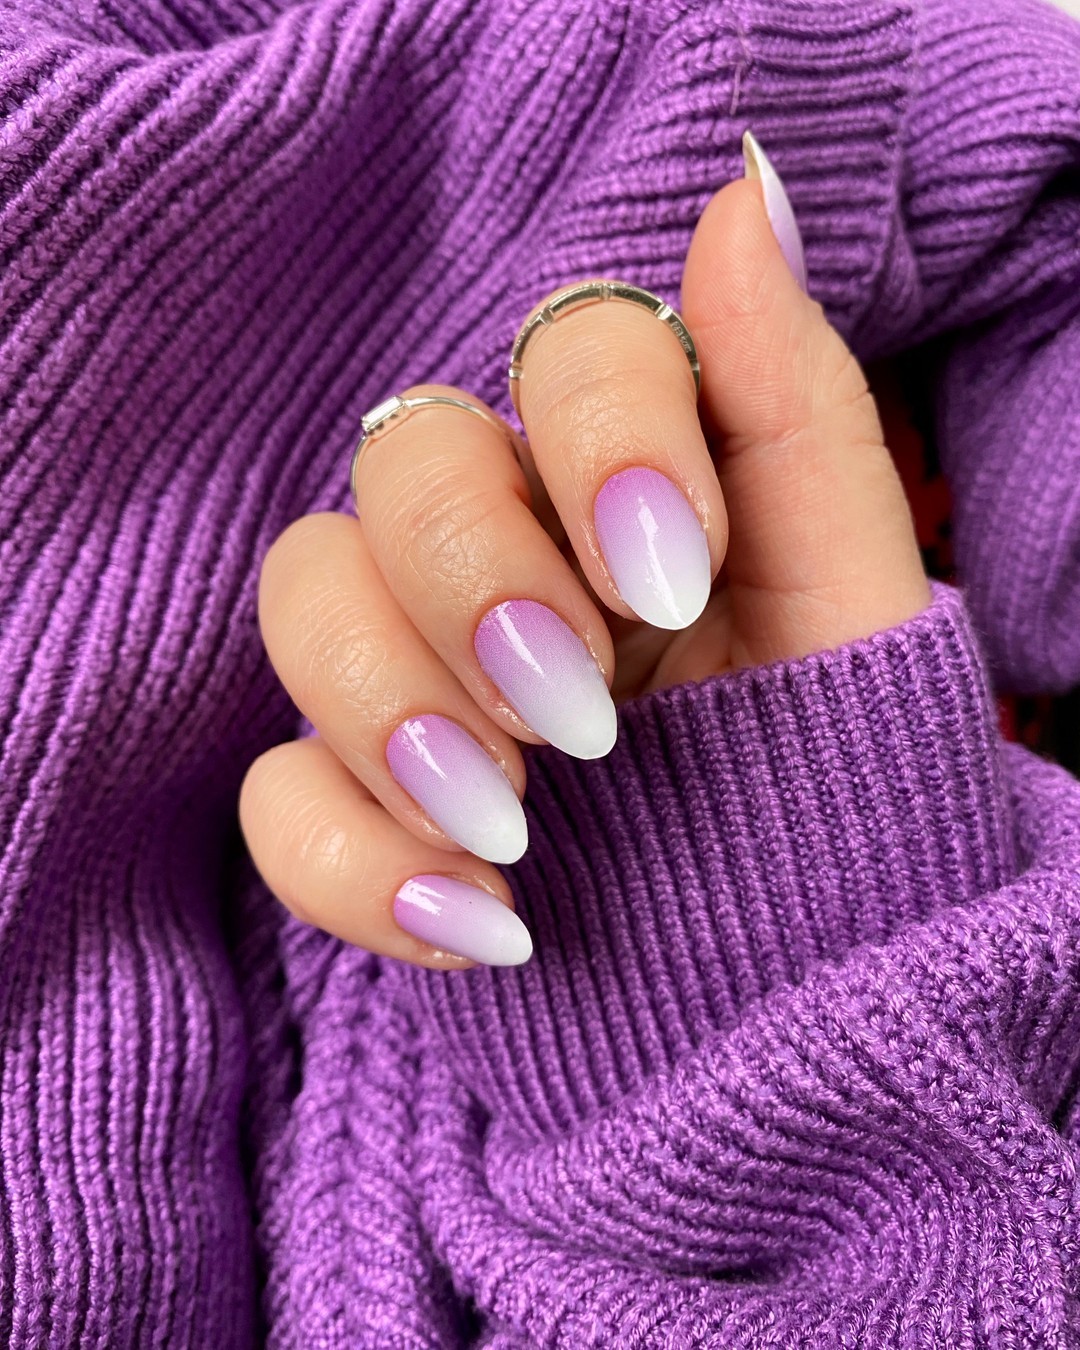 Nails with dreamlike lavender color.